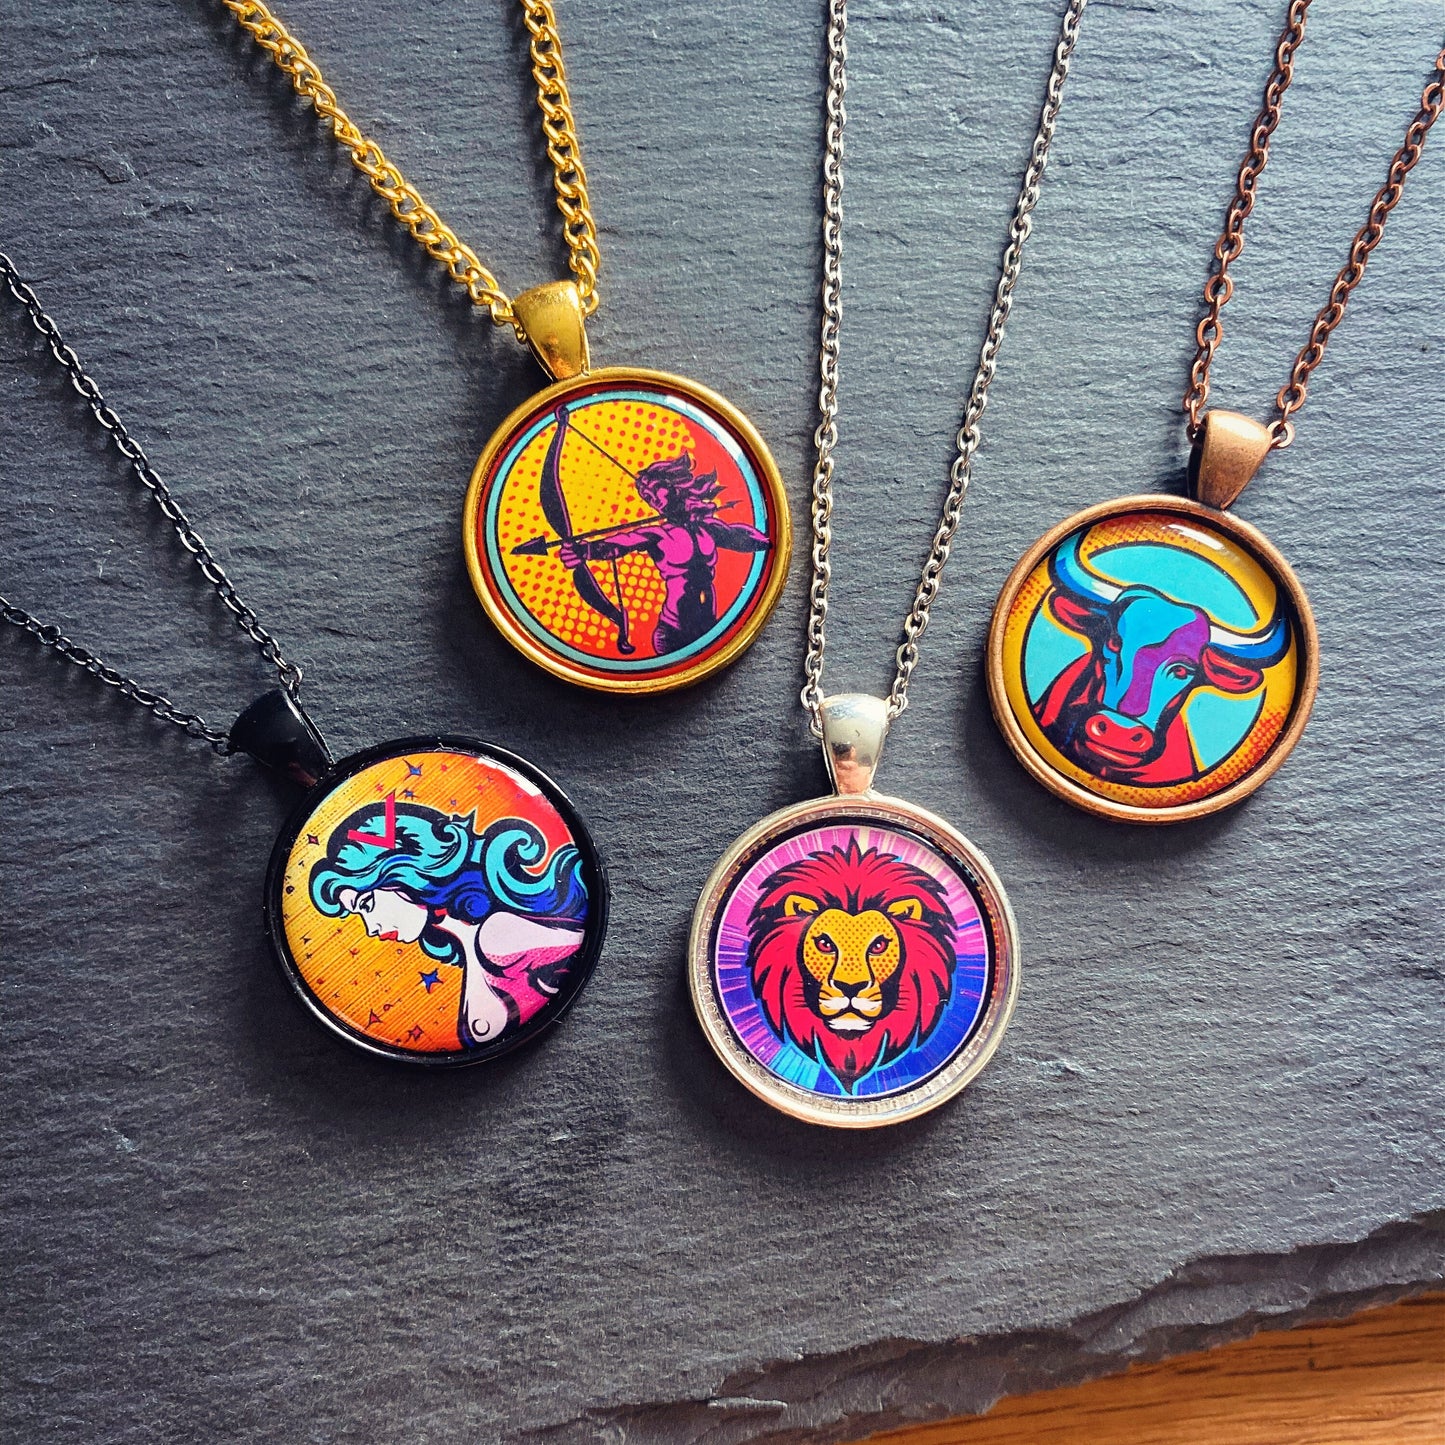 Libra Earrings. Horoscope Symbol Necklace. Zodiac Sign Jewellery. Astrology Earrings. Pop Art Colourful Pendant. Star Sign Gift. Scales.